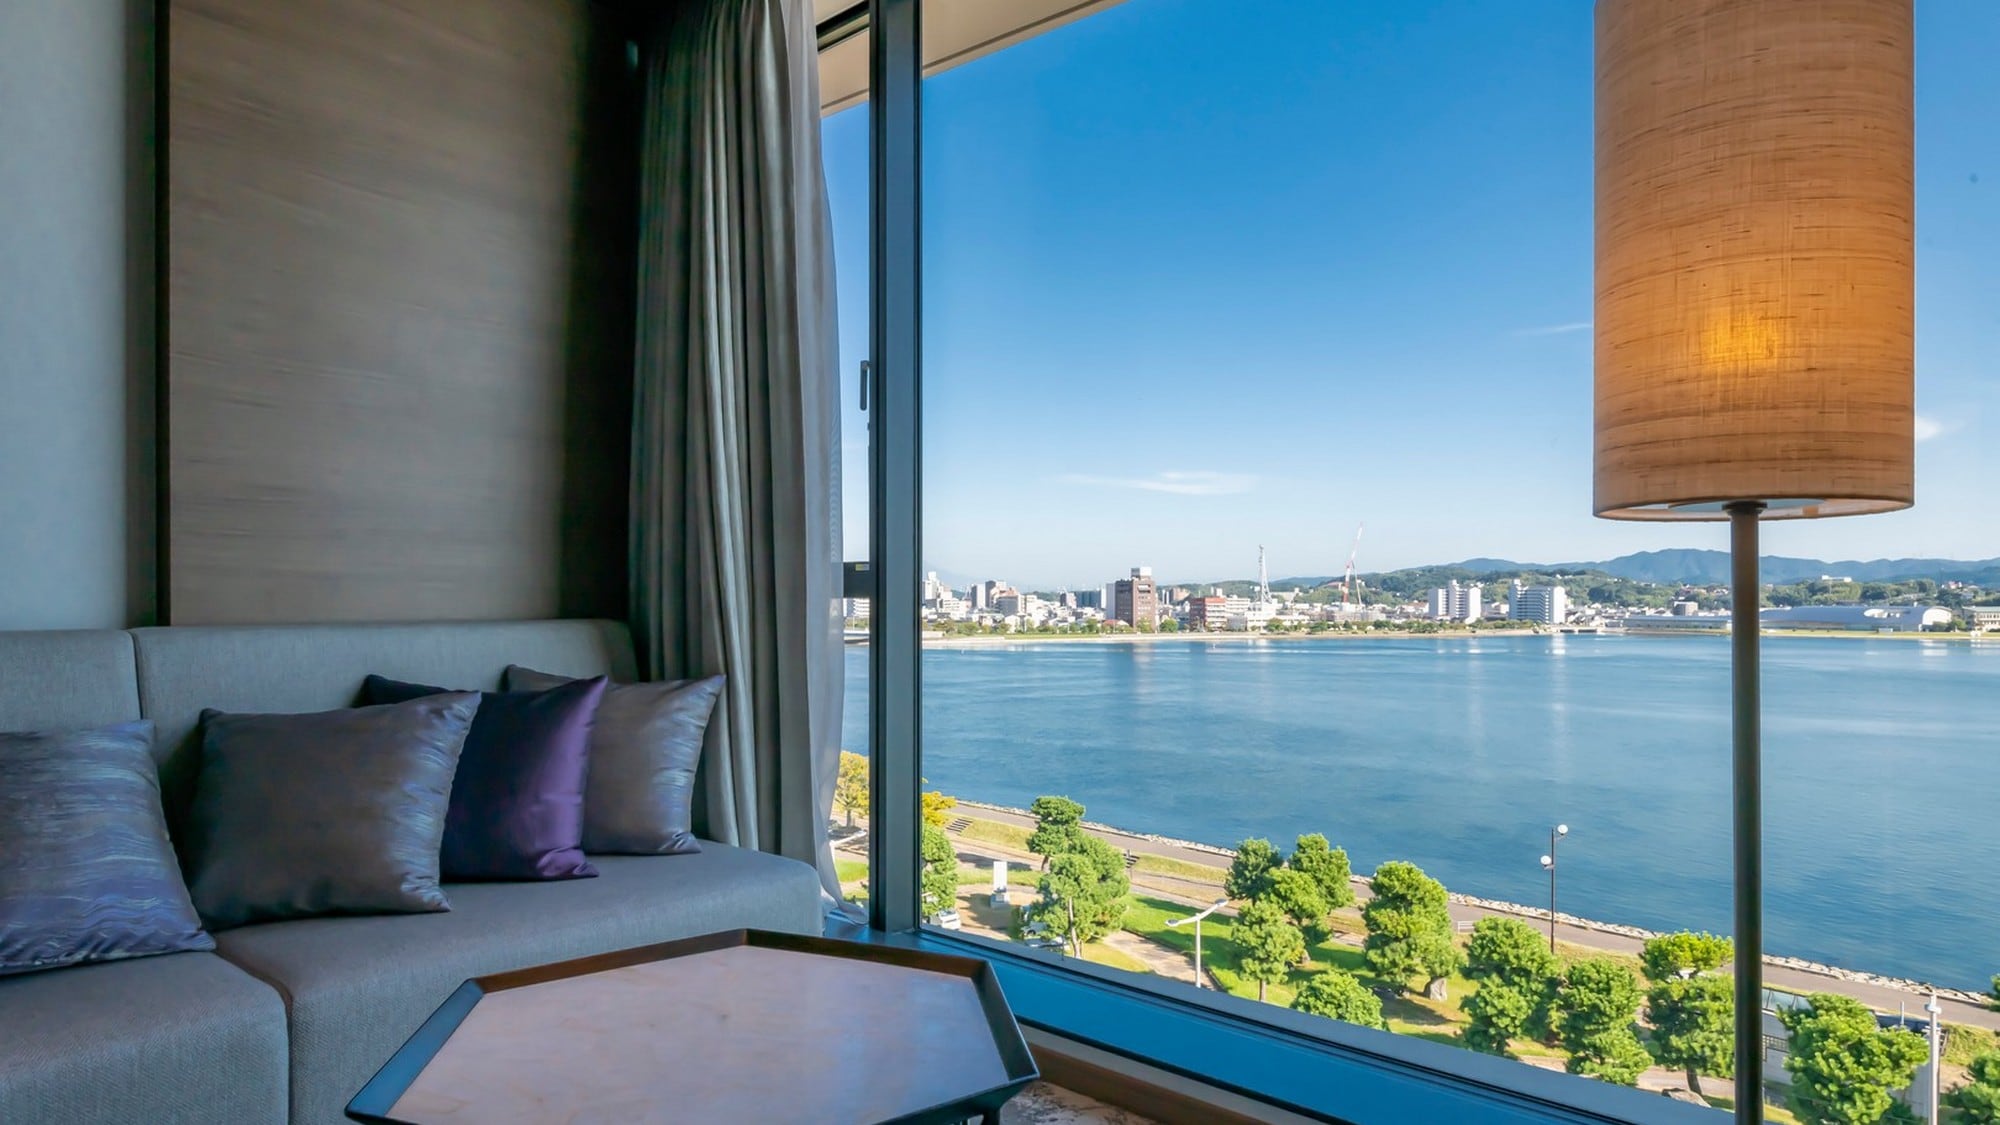 One of the features is the view of Lake Shinji from the room. Executive Twin